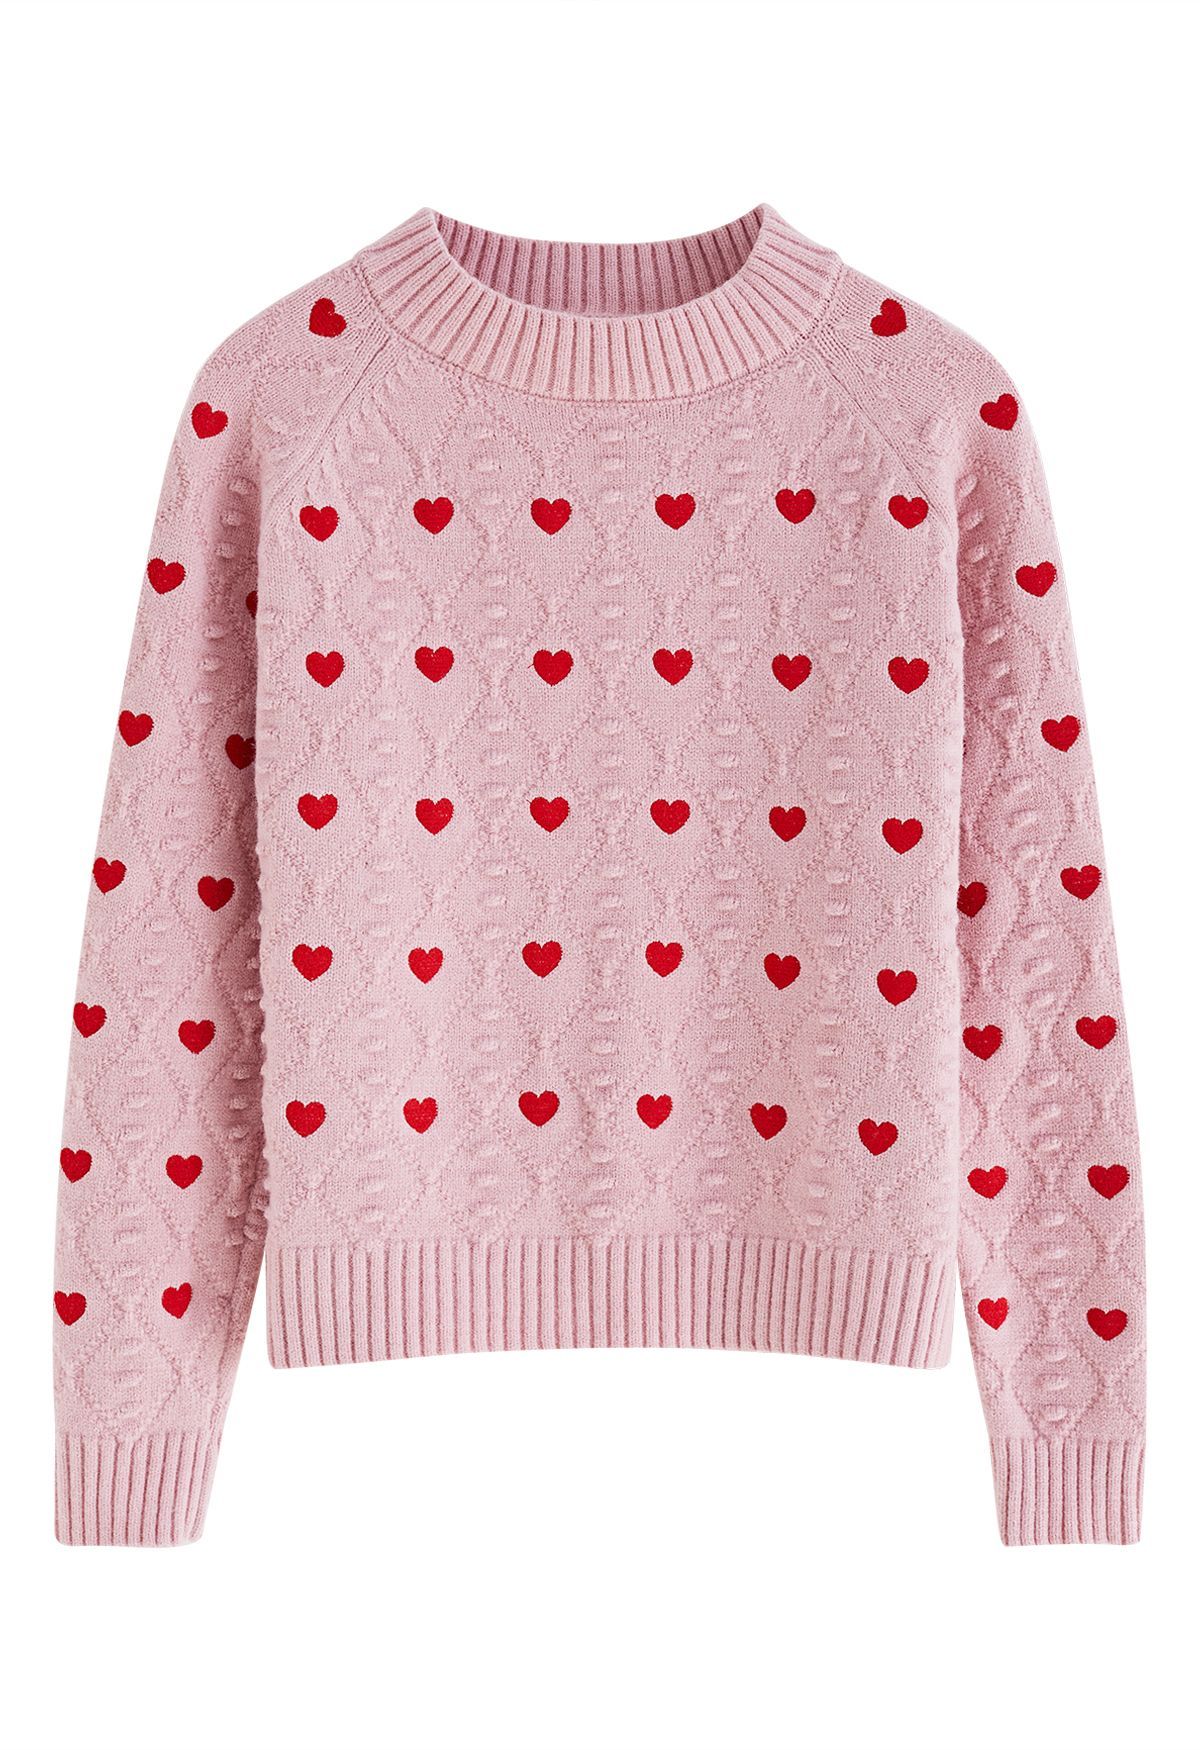 Full of Hearts Embroidered Emboss Knit Crop Sweater in Pink | Chicwish